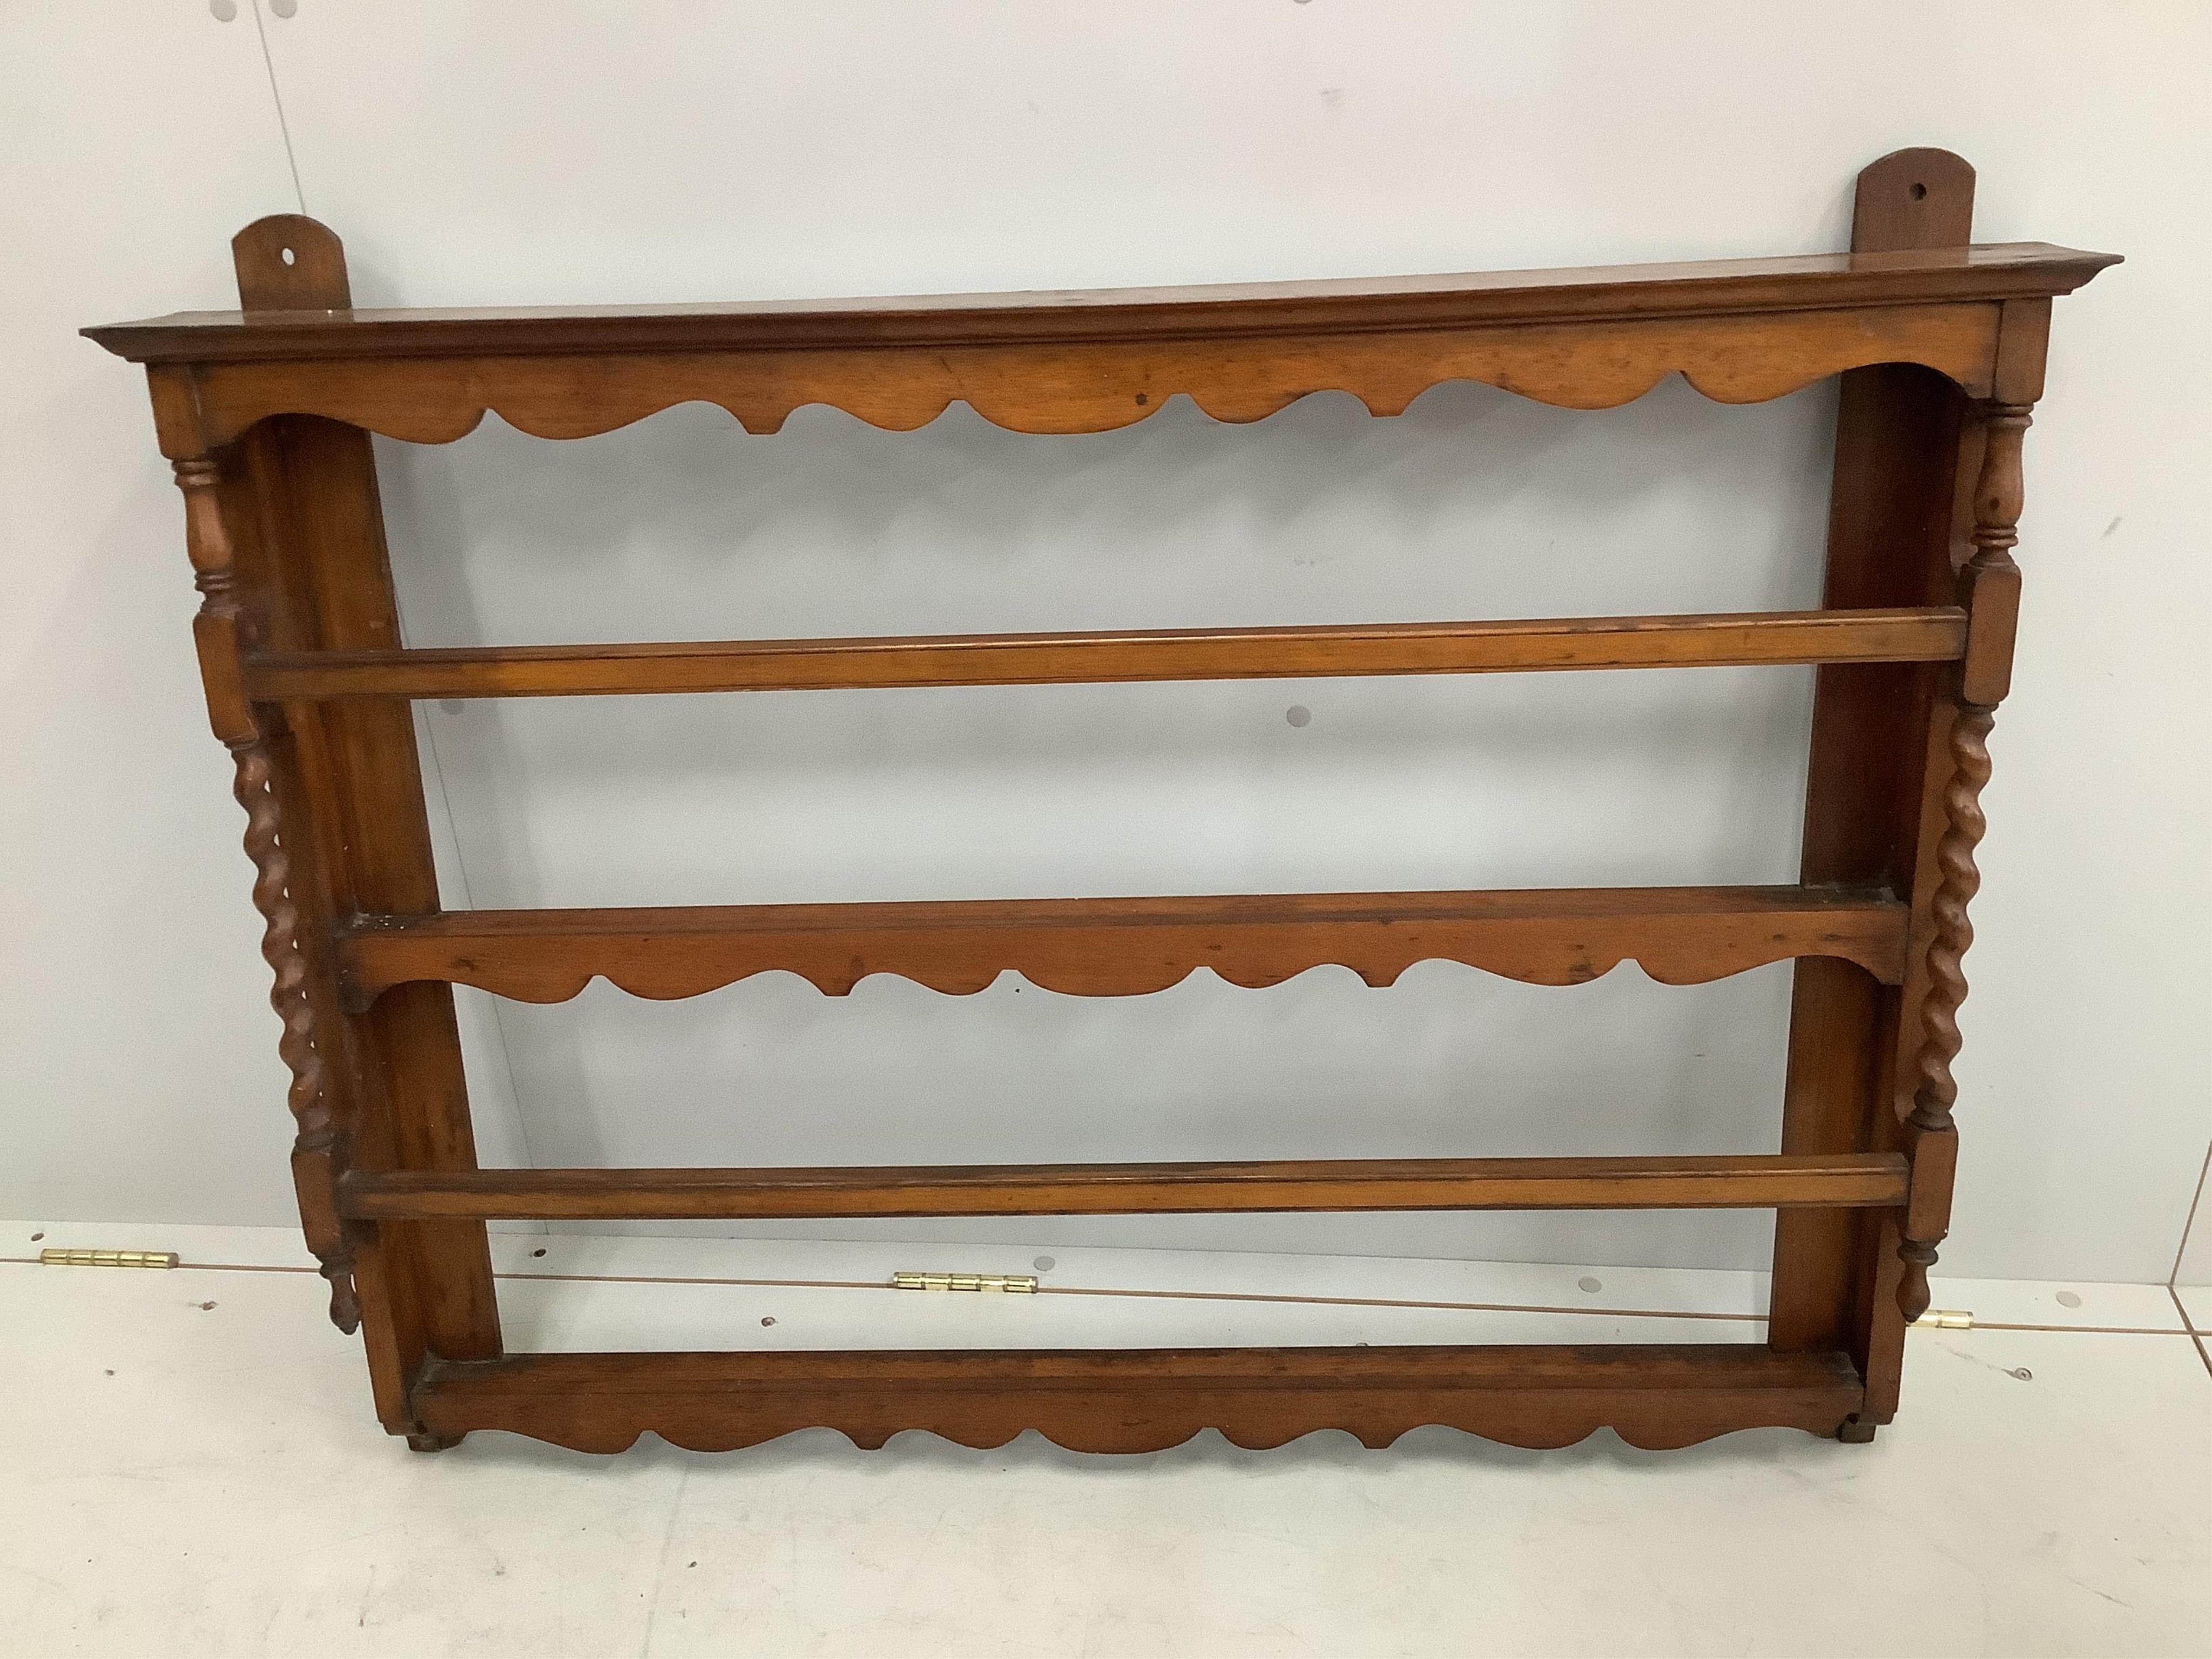 A small early 20th century mahogany plate rack, width 104cm, height 82cm. Condition - fair